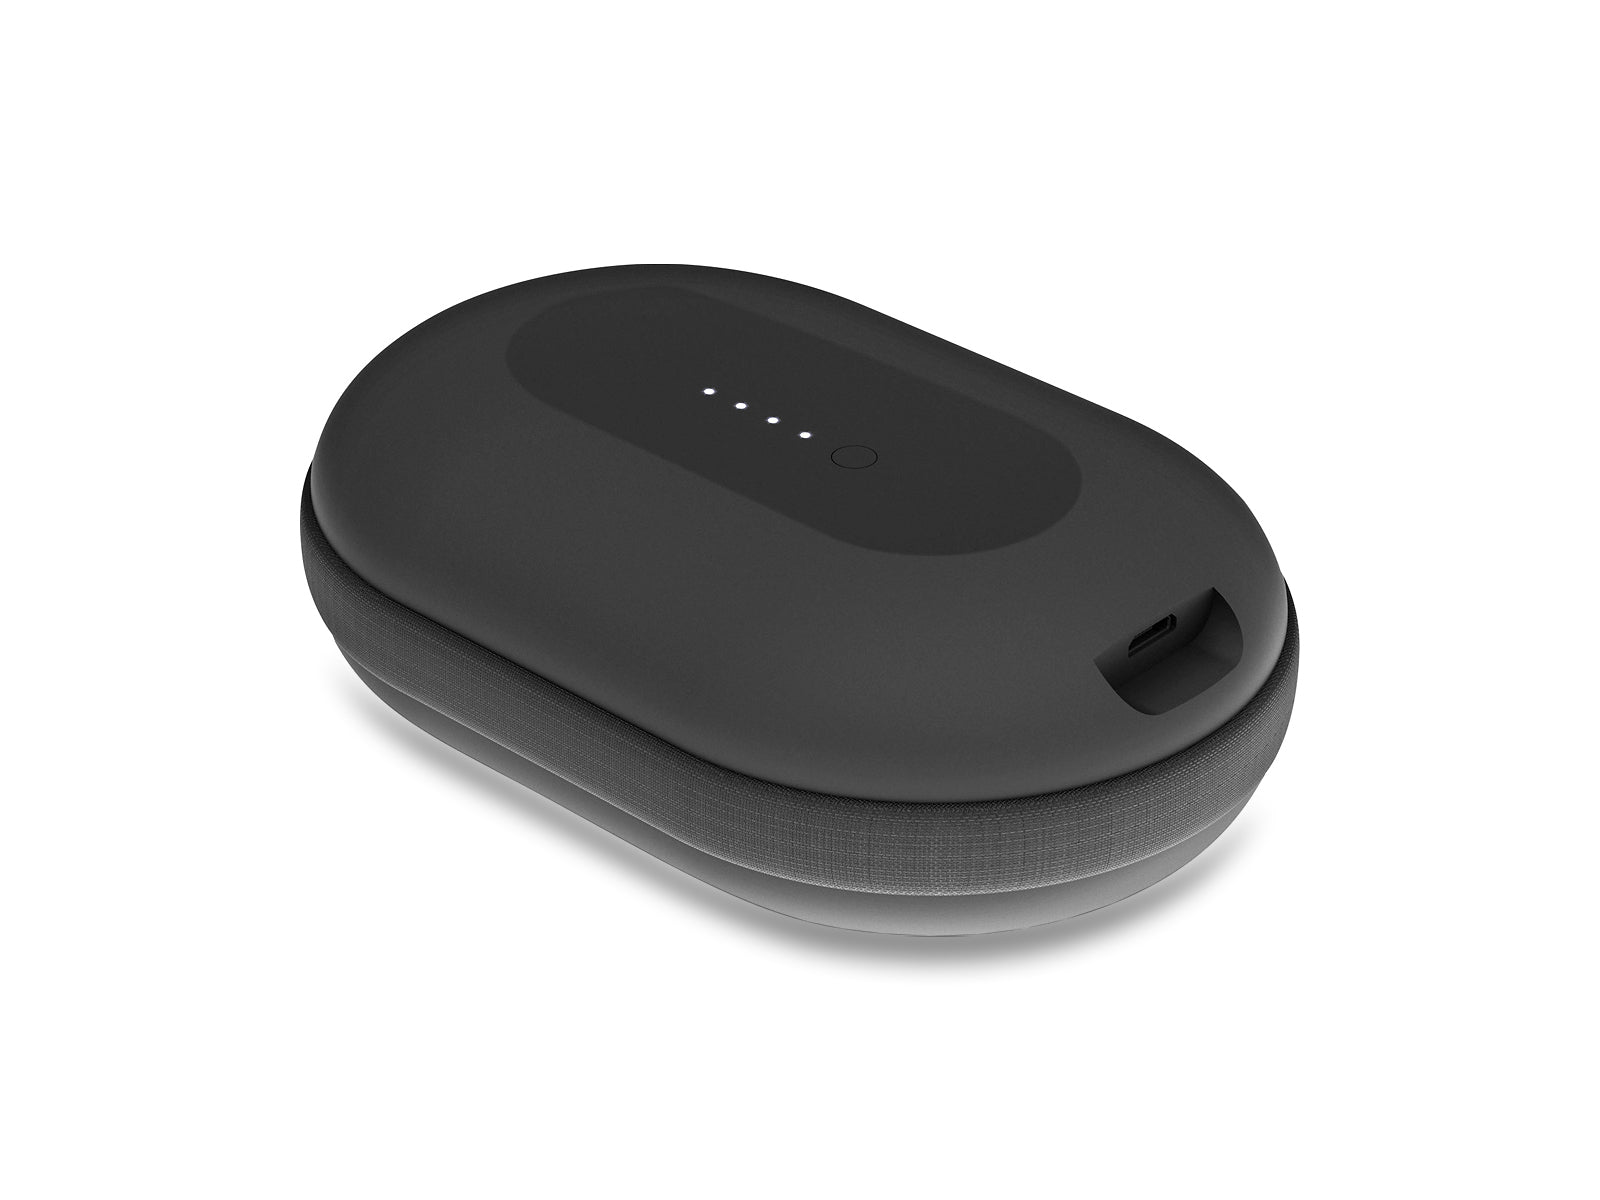 Mophie Portable Power Capsule Charger Side View